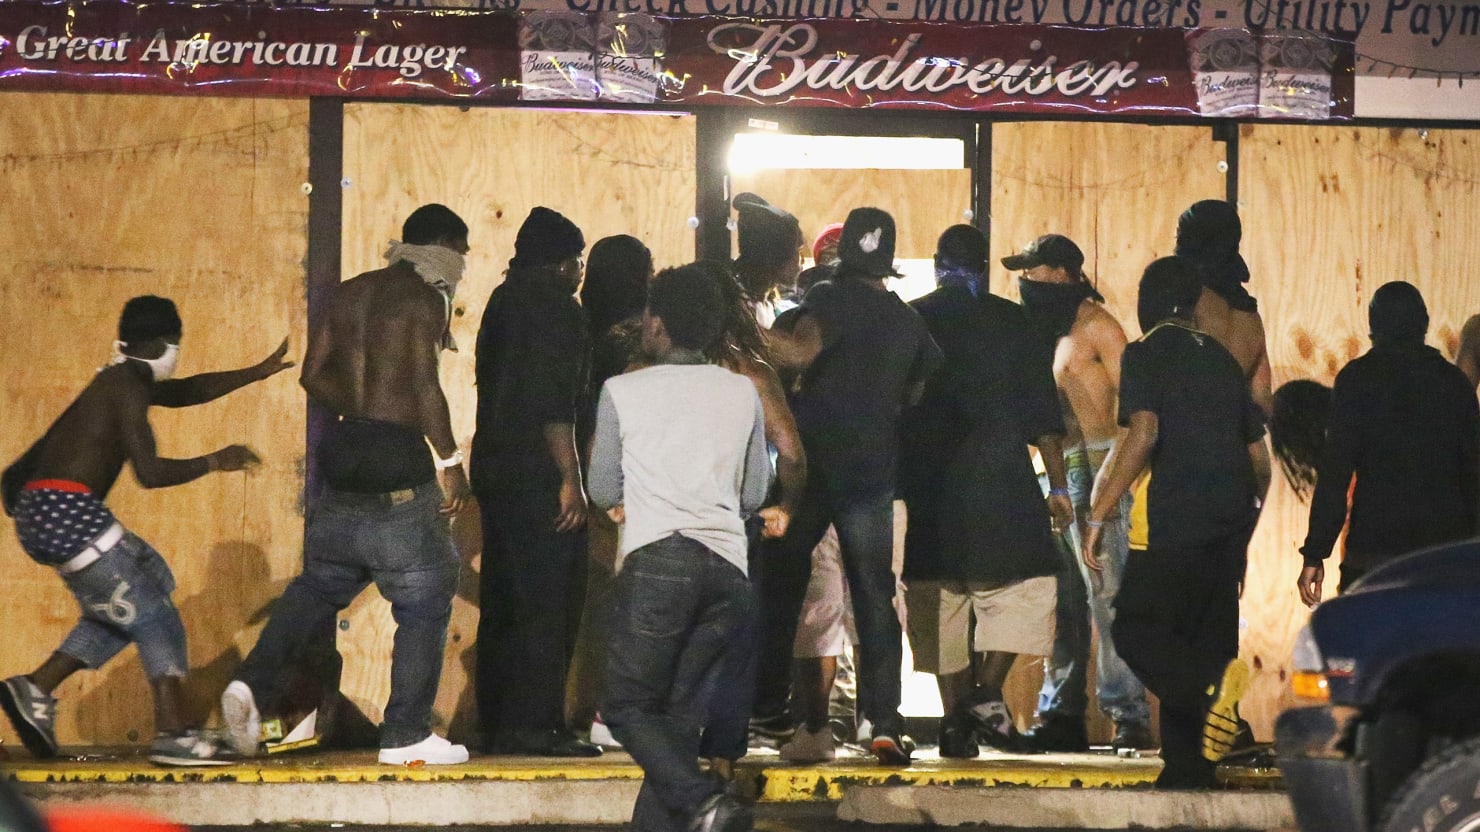 Surveillance shows looting of shoe store near Ferguson night after Michael  Brown's death